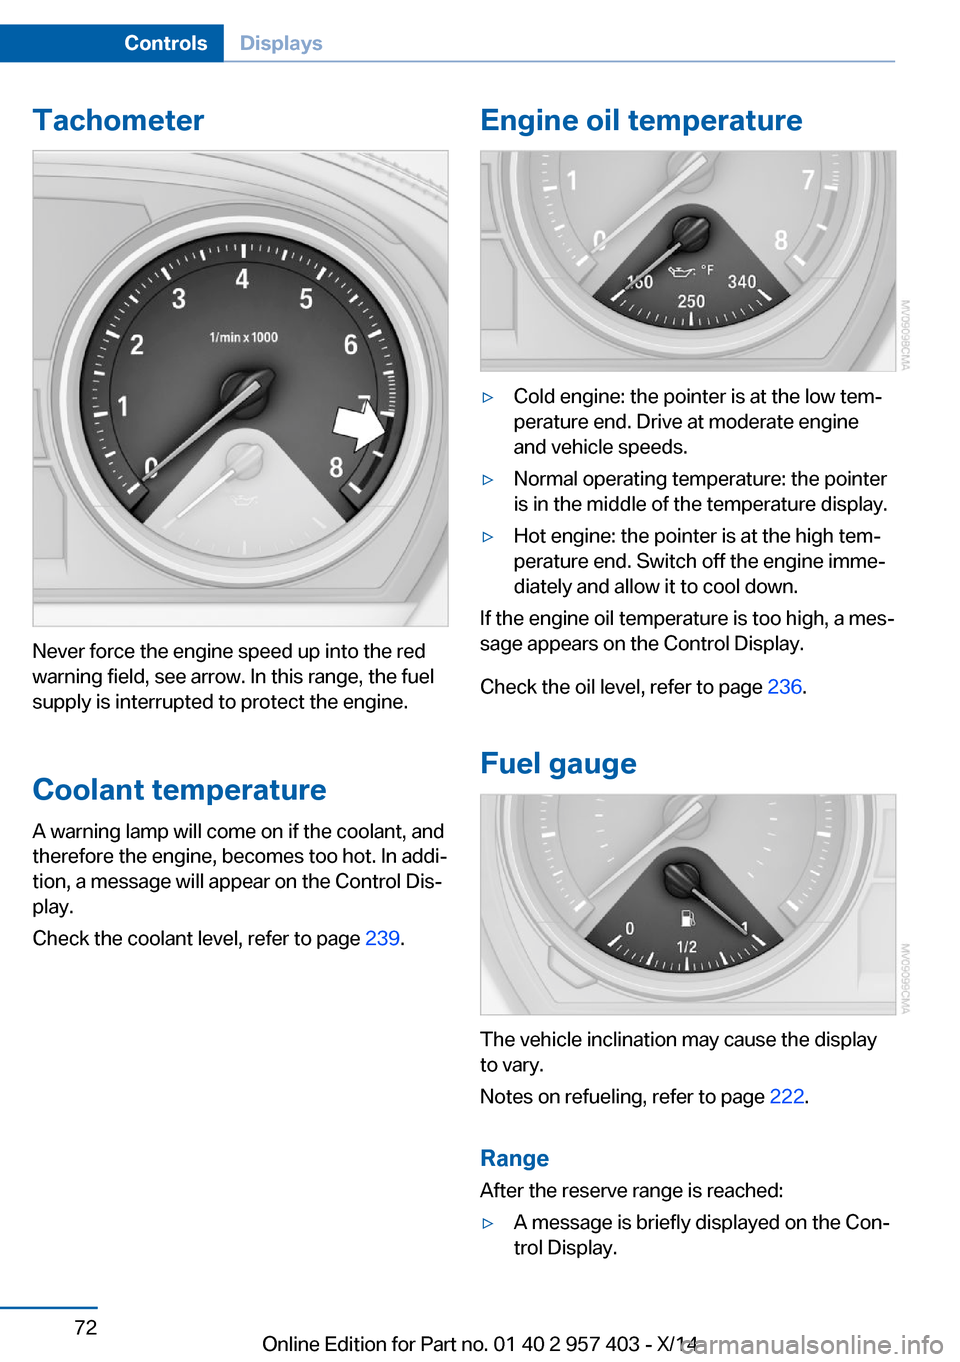 BMW Z4 2016 E89 Owners Manual Tachometer
Never force the engine speed up into the red
warning field, see arrow. In this range, the fuel
supply is interrupted to protect the engine.
Coolant temperature A warning lamp will come on i